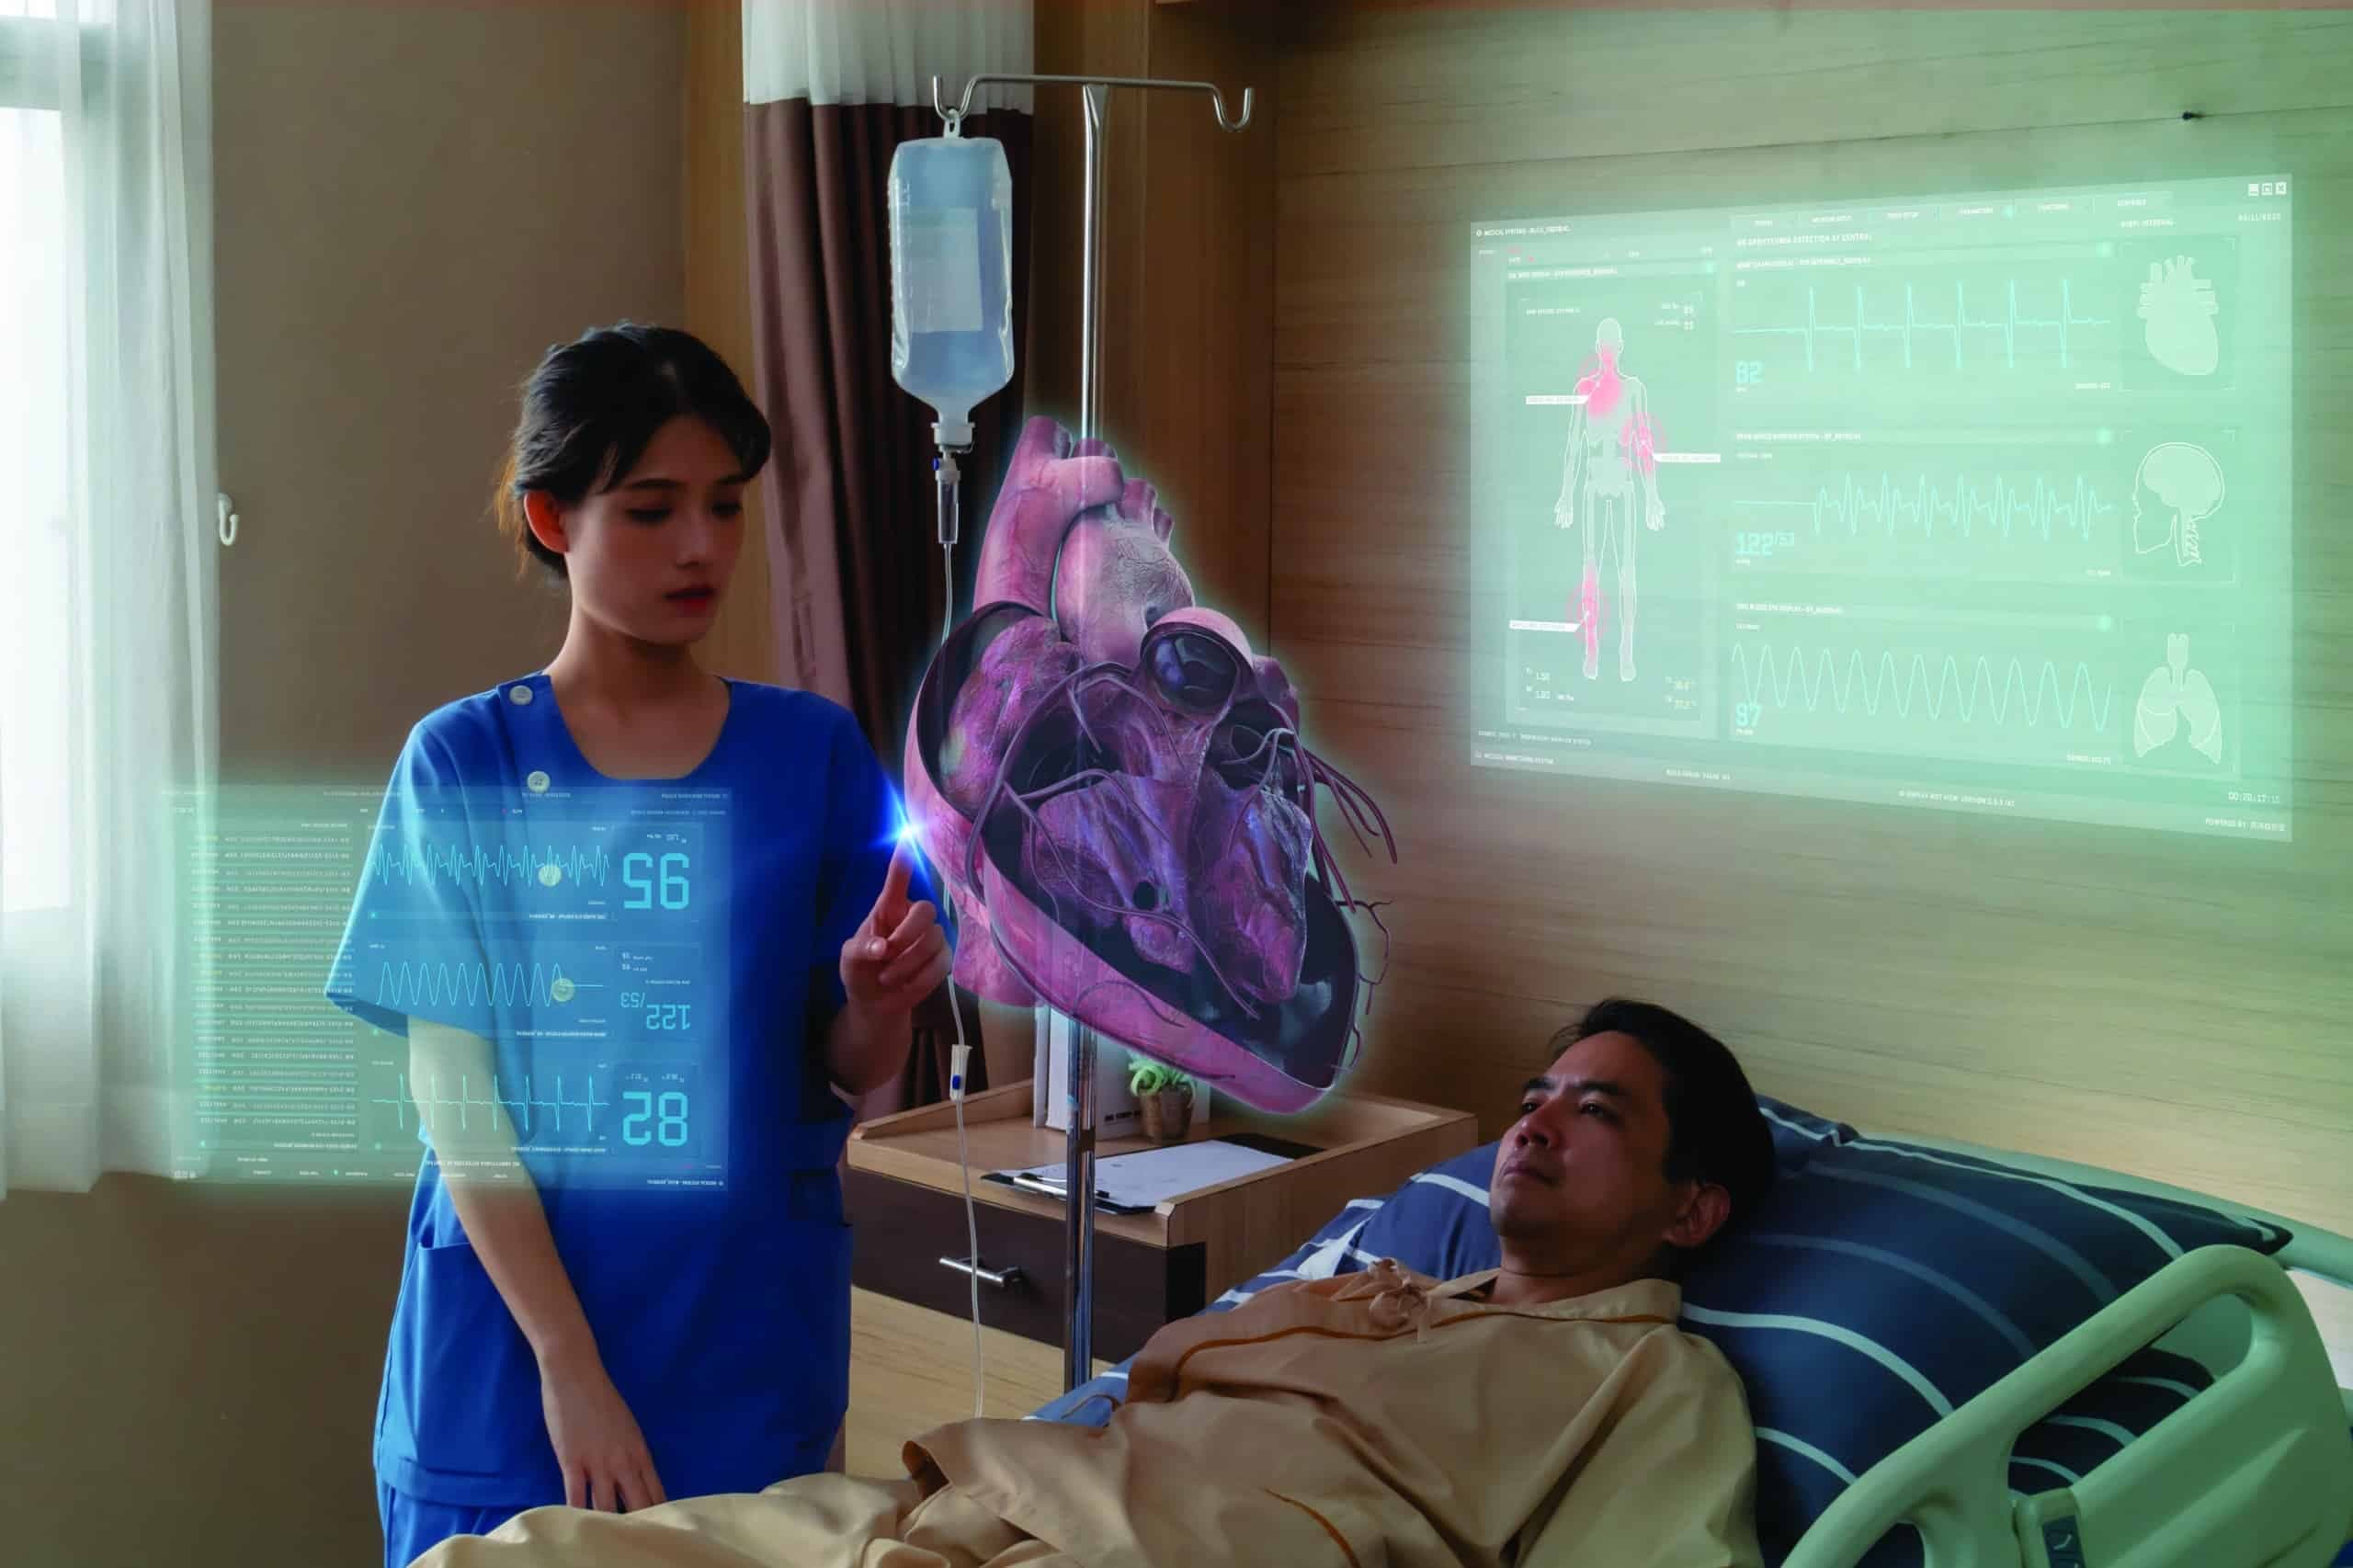 new normal Futuristic Technology in medical concept doctor describes patient by using artificial intelligence, machine learning, digital twin, 5g, big data, iot, augmented mixed virtual rality, ar, vr